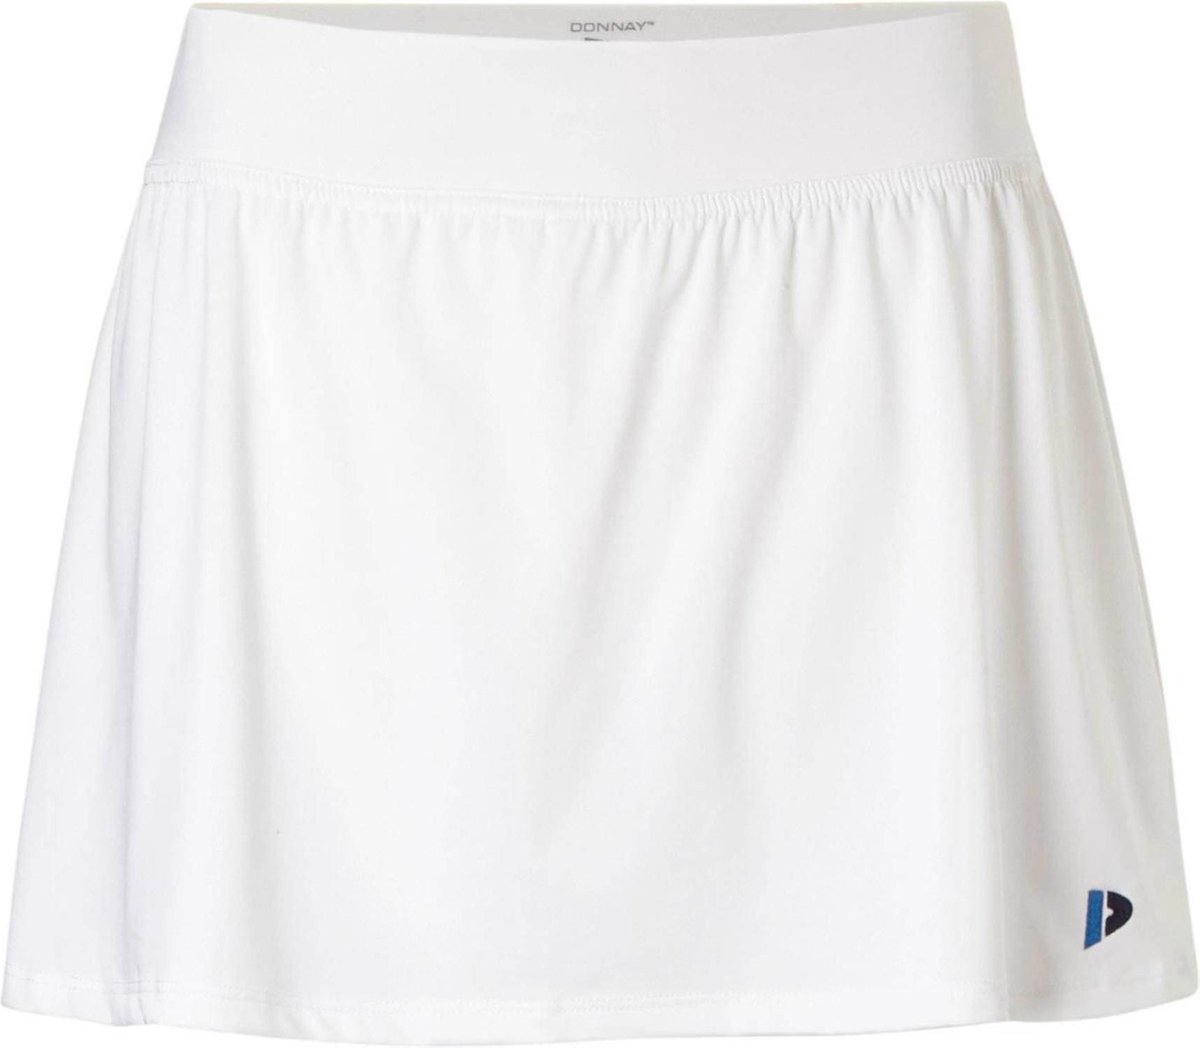 Donnay Cooldry Skirt - Sportrok - Dames - Maat XXL - Wit